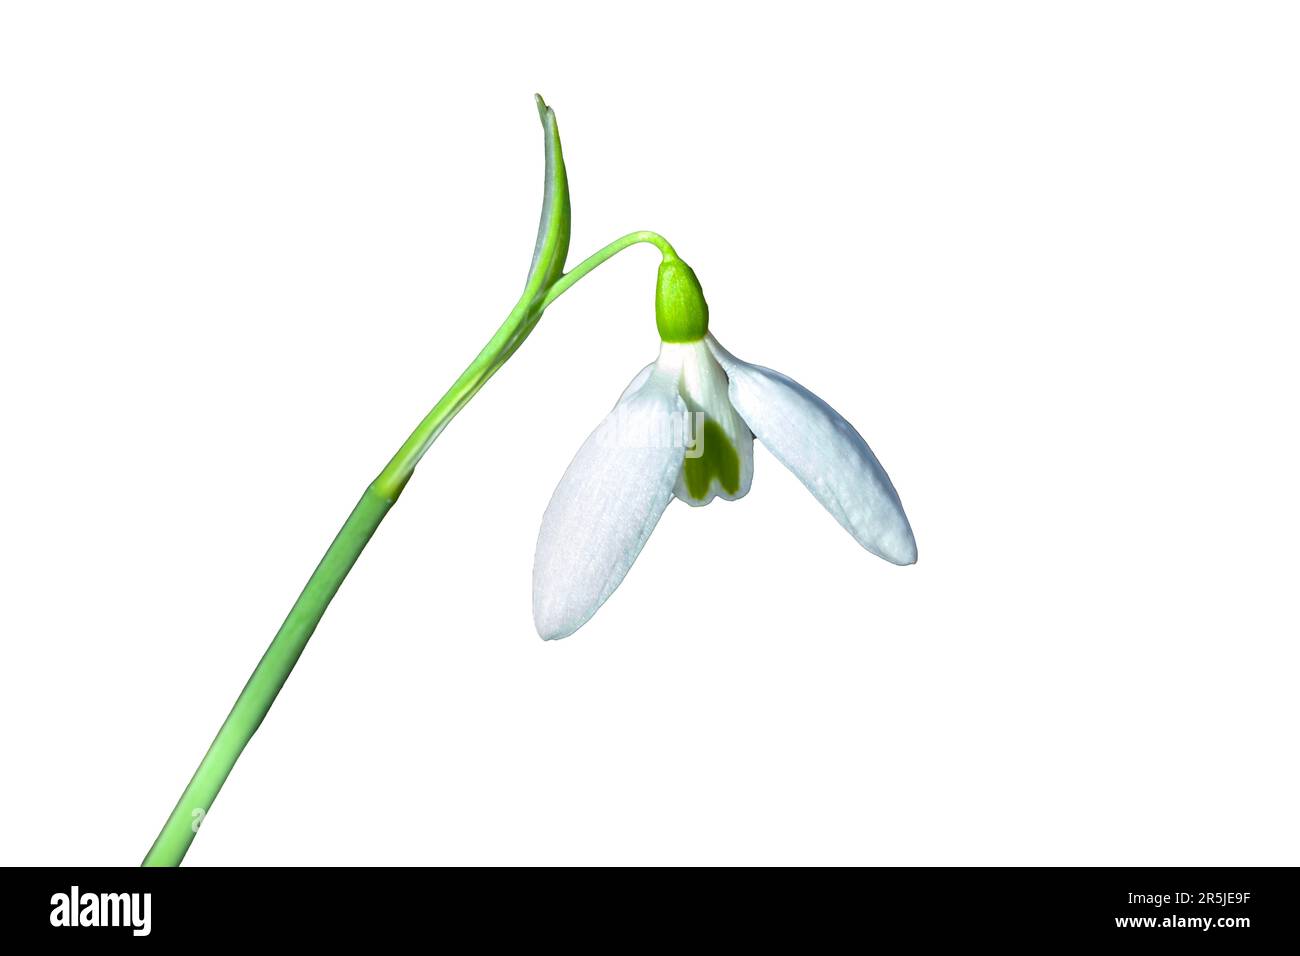 Snowdrop galanthus elwesii var monostictus (Greater Snowdrop) a winter spring flowering plant with a white springtime flower, stock photo image cut ou Stock Photo